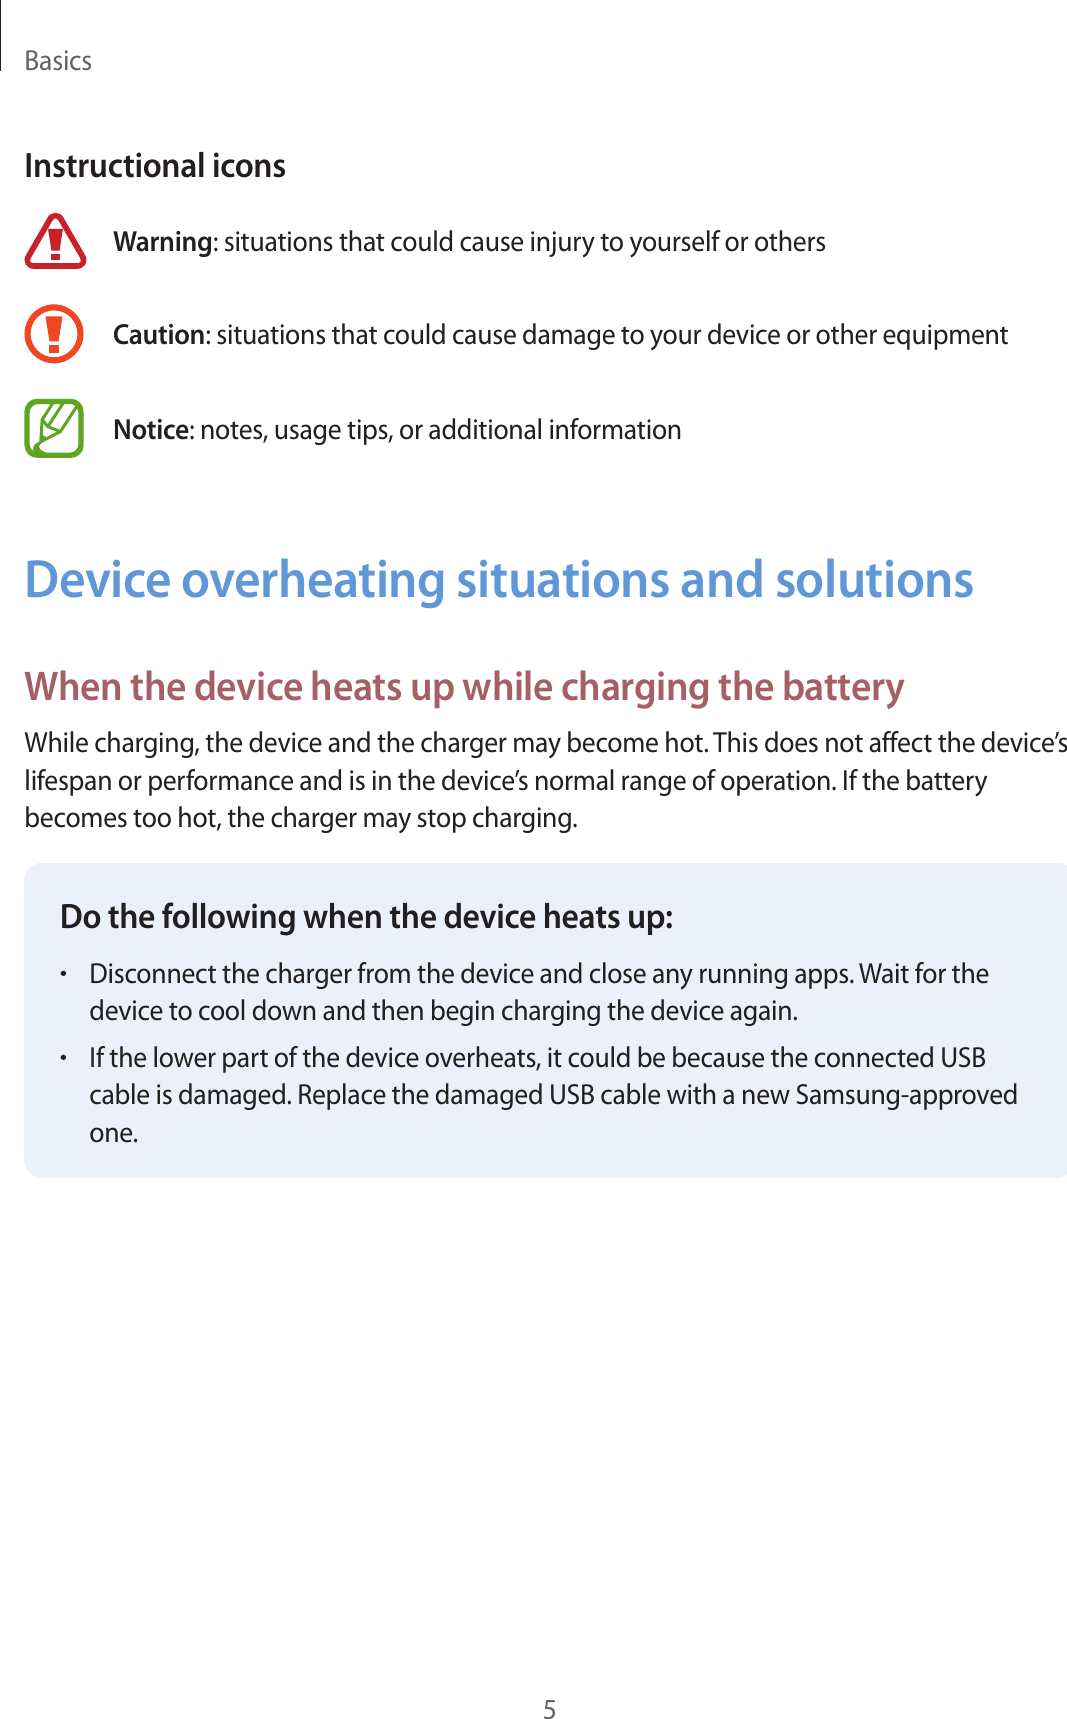 Basics5Instructional iconsWarning: situations that could cause injury to yourself or othersCaution: situations that could cause damage to your device or other equipmentNotice: notes, usage tips, or additional informationDevice overheating situations and solutionsWhen the device heats up while charging the batteryWhile charging, the device and the charger may become hot. This does not affect the device’s lifespan or performance and is in the device’s normal range of operation. If the battery becomes too hot, the charger may stop charging.Do the following when the device heats up:•Disconnect the charger from the device and close any running apps. Wait for thedevice to cool down and then begin charging the device again.•If the lower part of the device overheats, it could be because the connected USBcable is damaged. Replace the damaged USB cable with a new Samsung-approvedone.